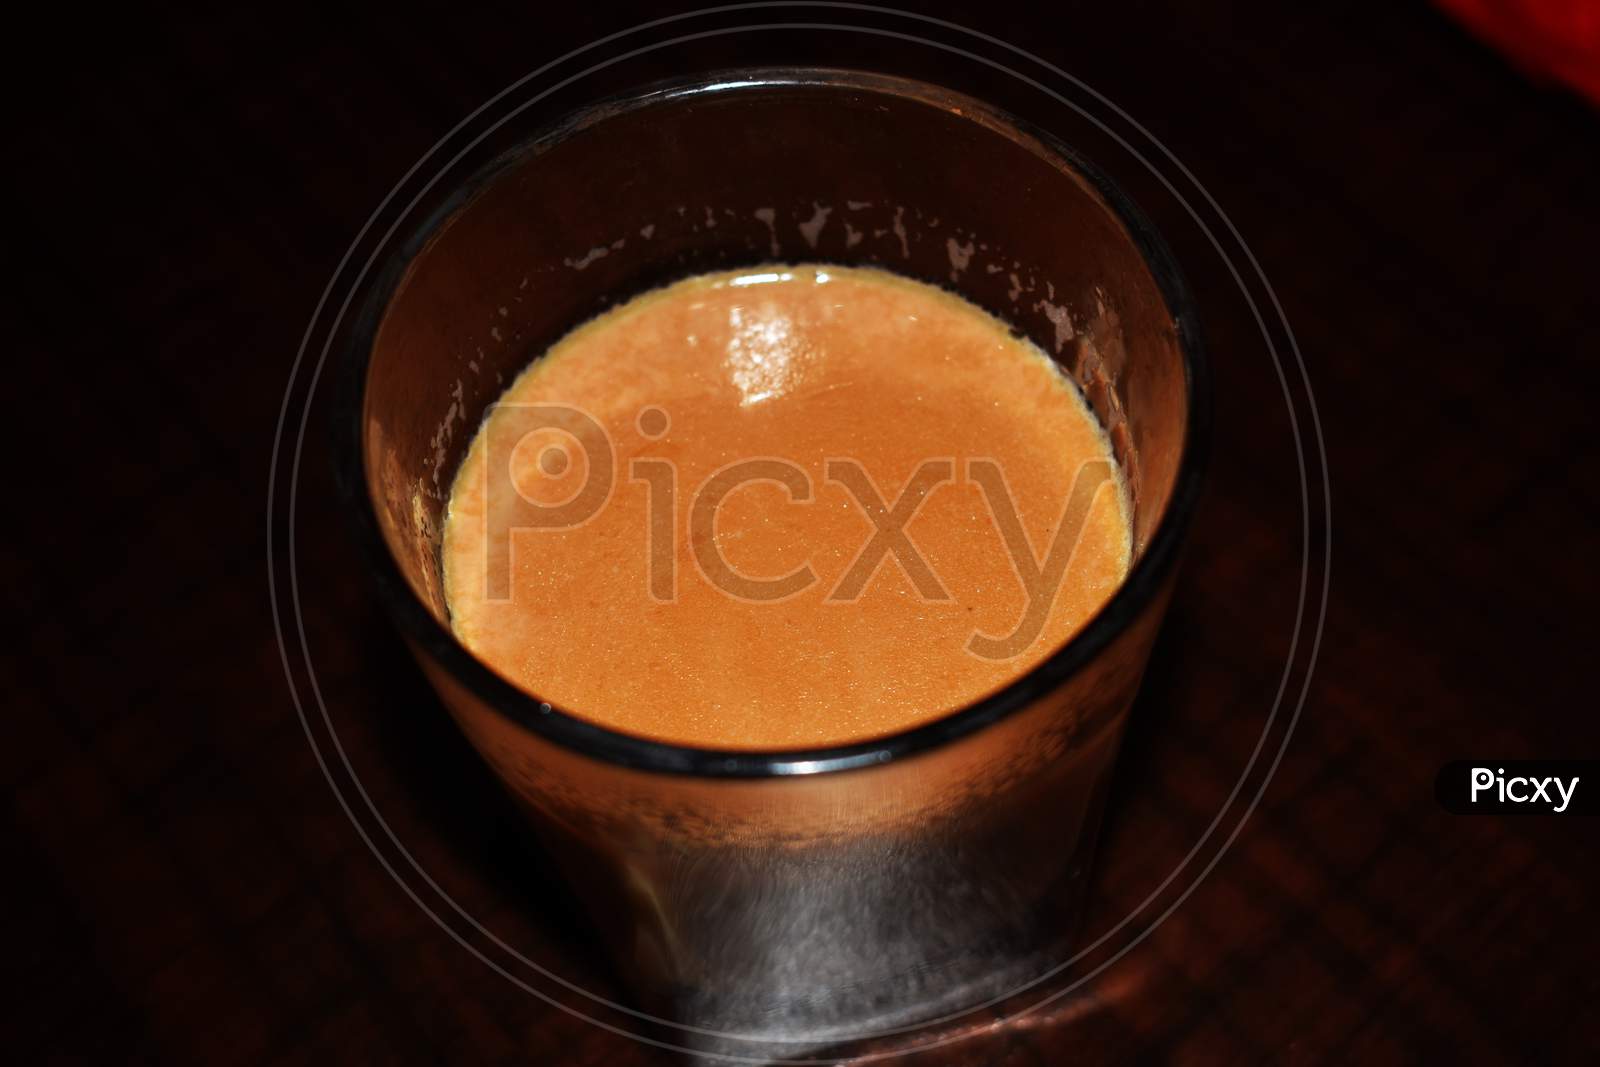 Hot Indian Orange Tea With Milk In Glass Cup On The Brown Table, Top View